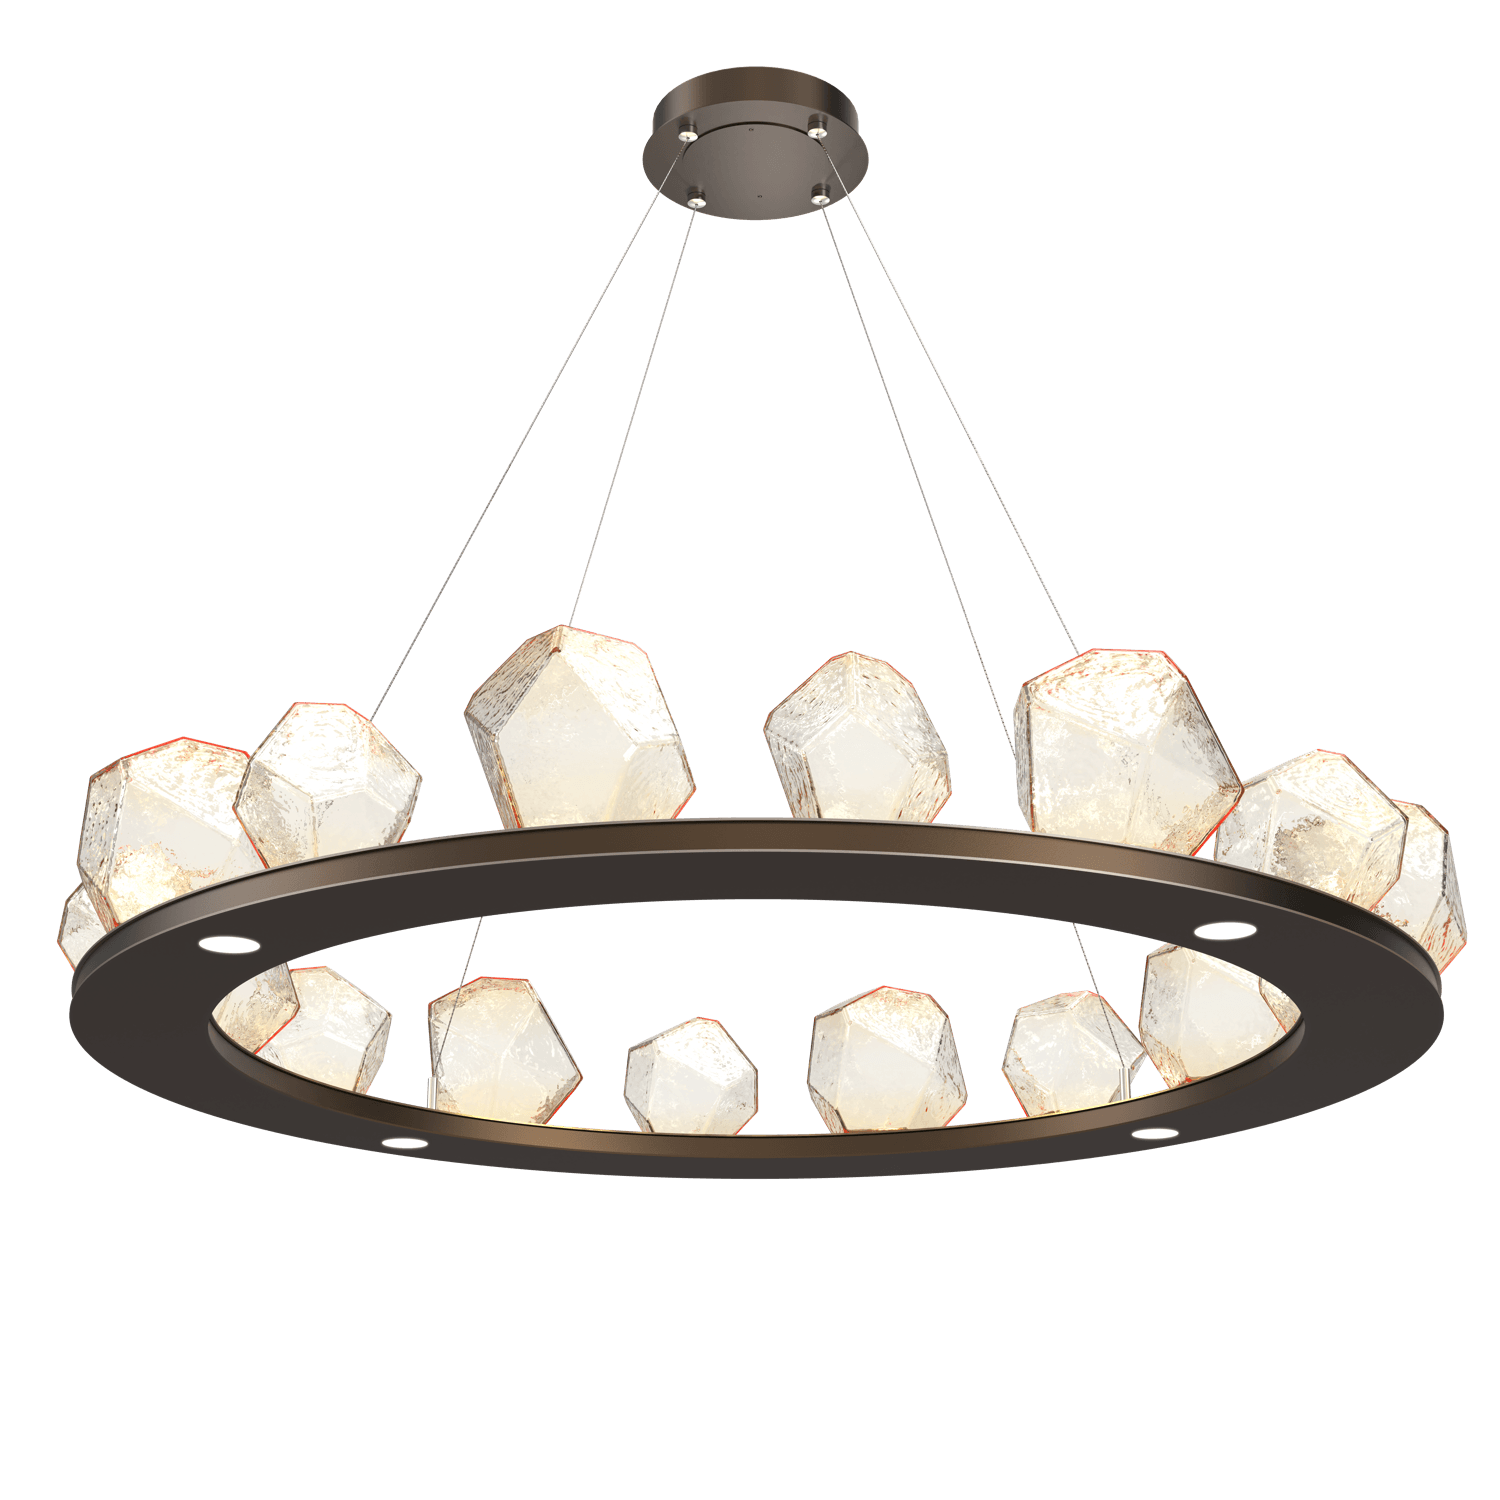 CHB0039-0D-FB-A-Hammerton-Studio-Gem-48-inch-ring-chandelier-with-flat-bronze-finish-and-amber-blown-glass-shades-and-LED-lamping